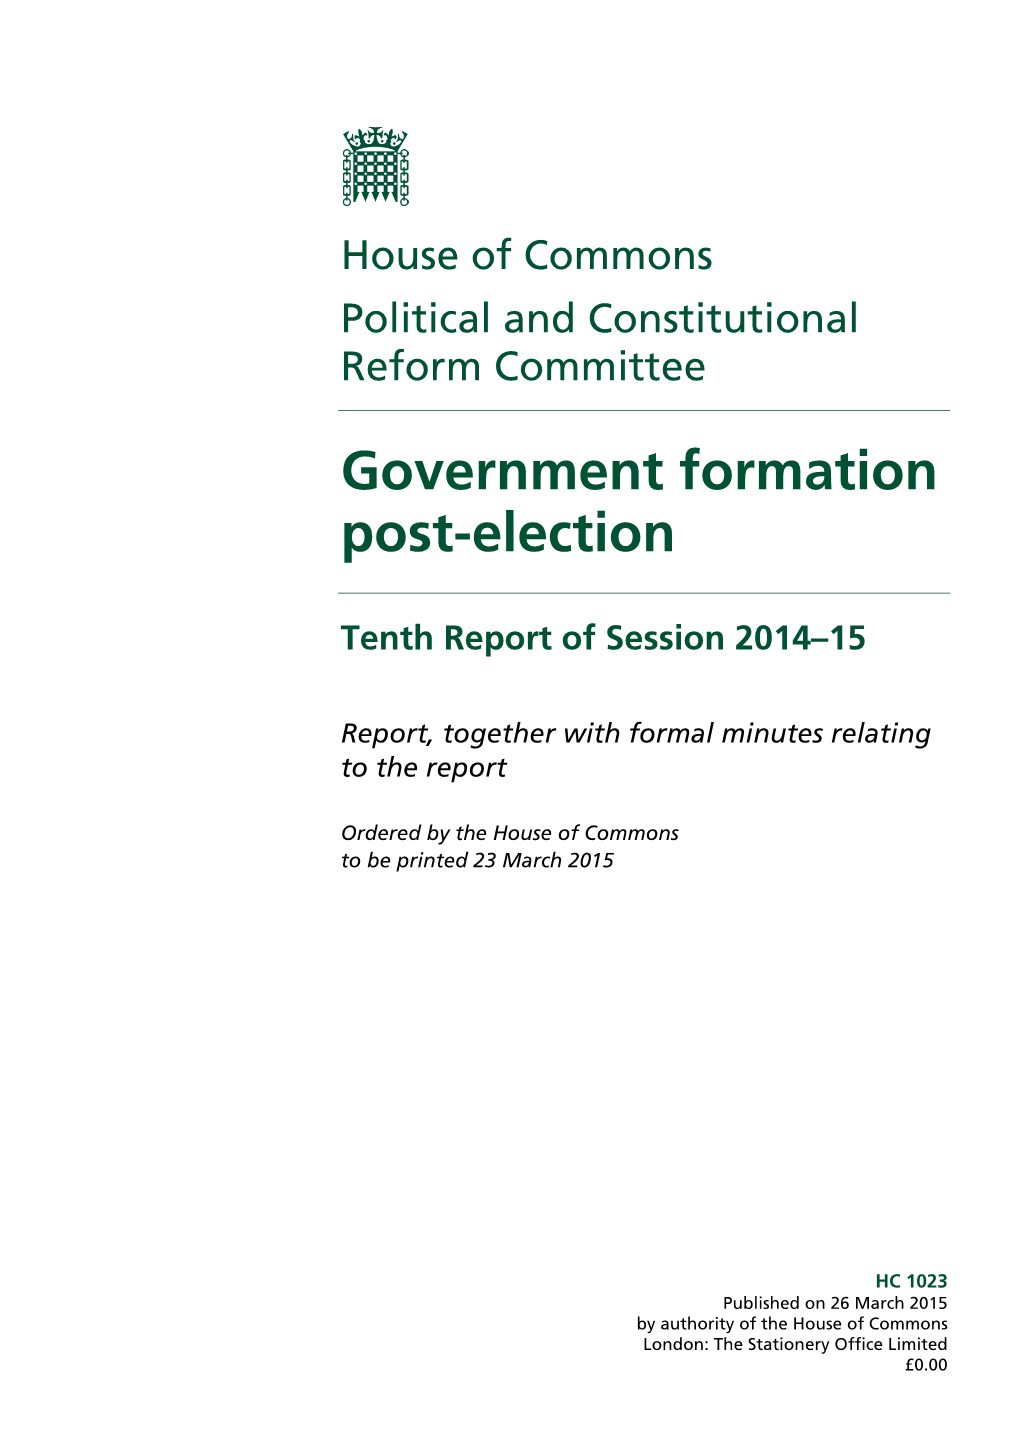 Government Formation Post-Election